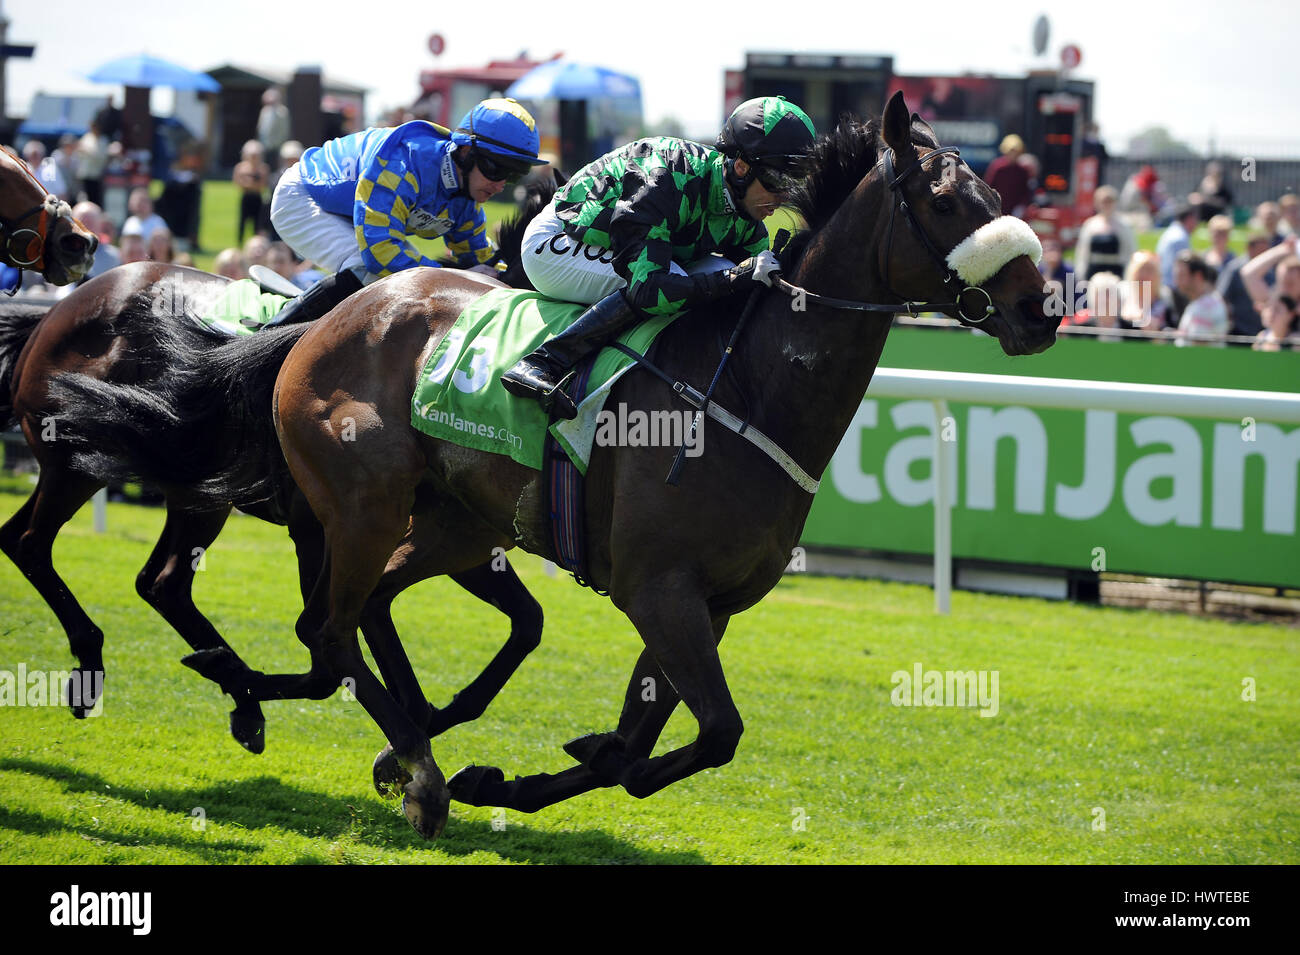 CLEVER COOKIE RIDDEN BY GRAHAM LEE RIDDEN BY GRAHAM LEE YORK RACECOURSE YORK ENGLAND 14 May 2014 Stock Photo